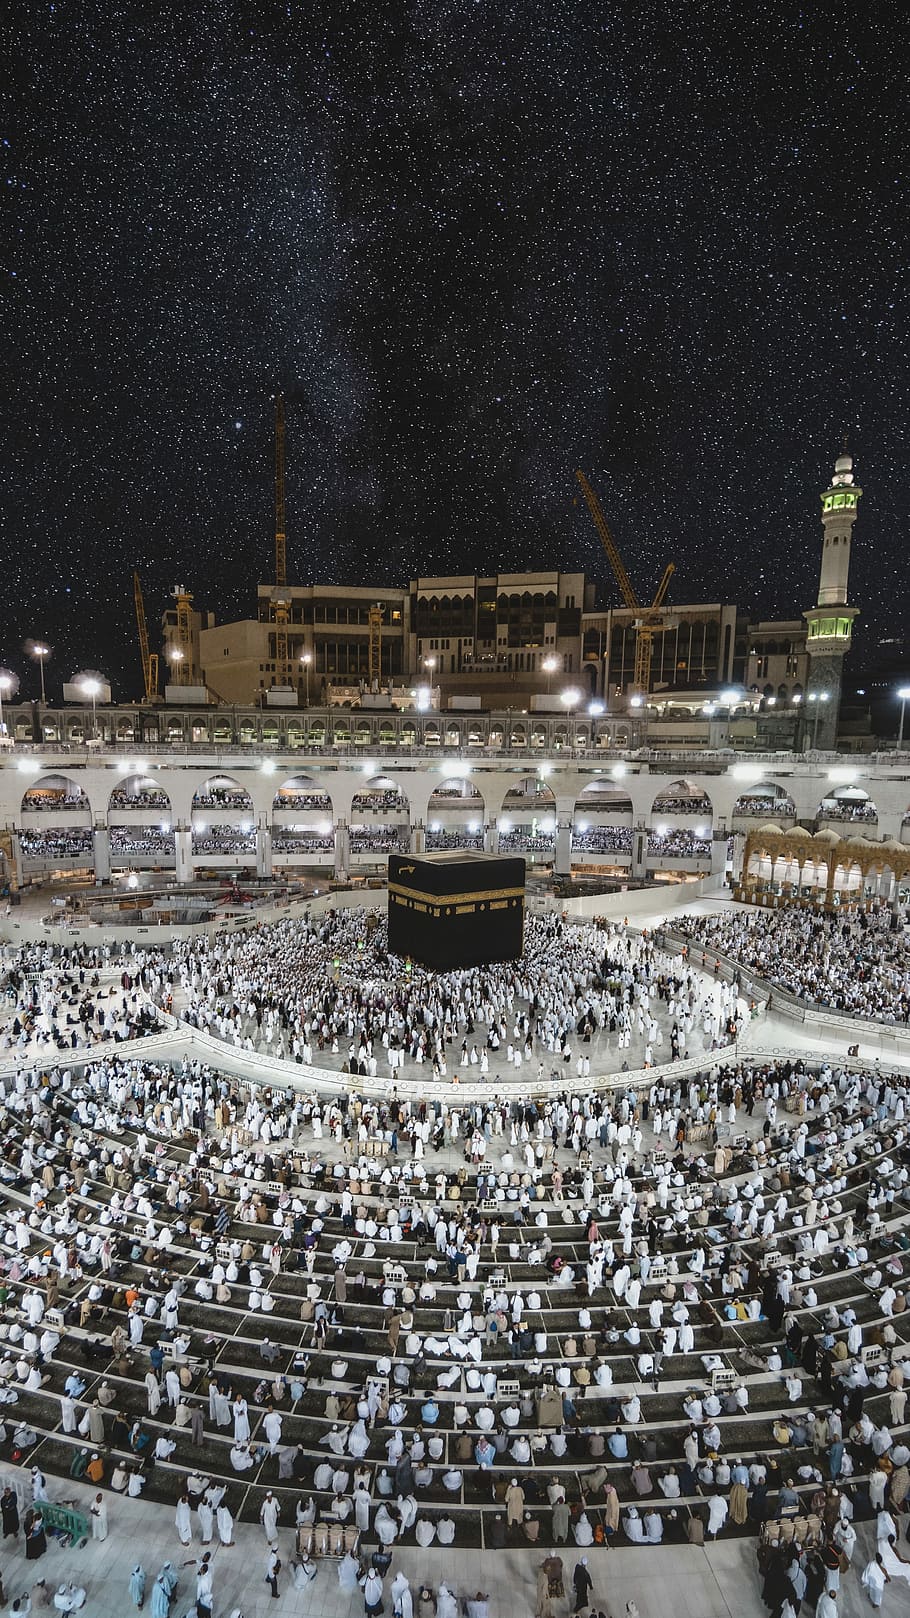 Kaaba praying ground, Grand Mosque of Mecca during nighttime